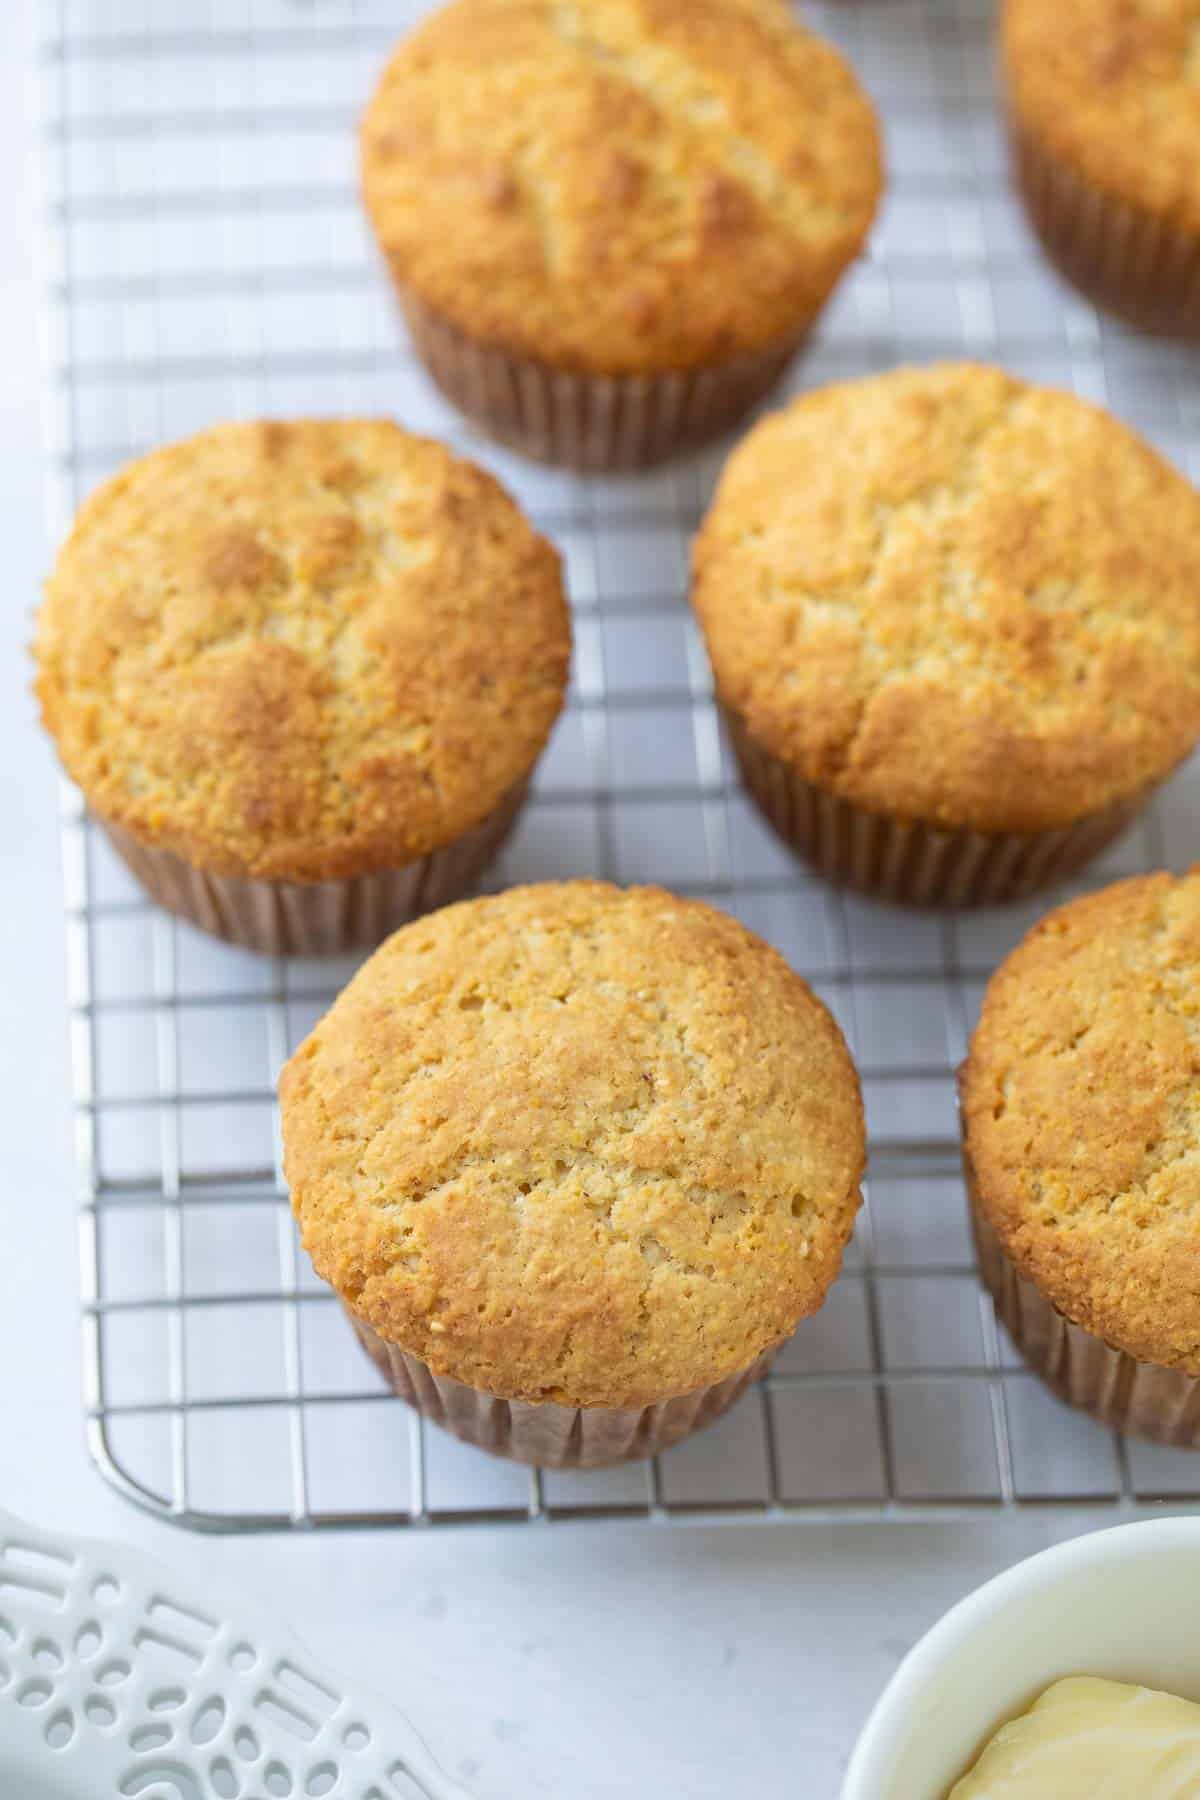 corn muffins cooling on a wire rack